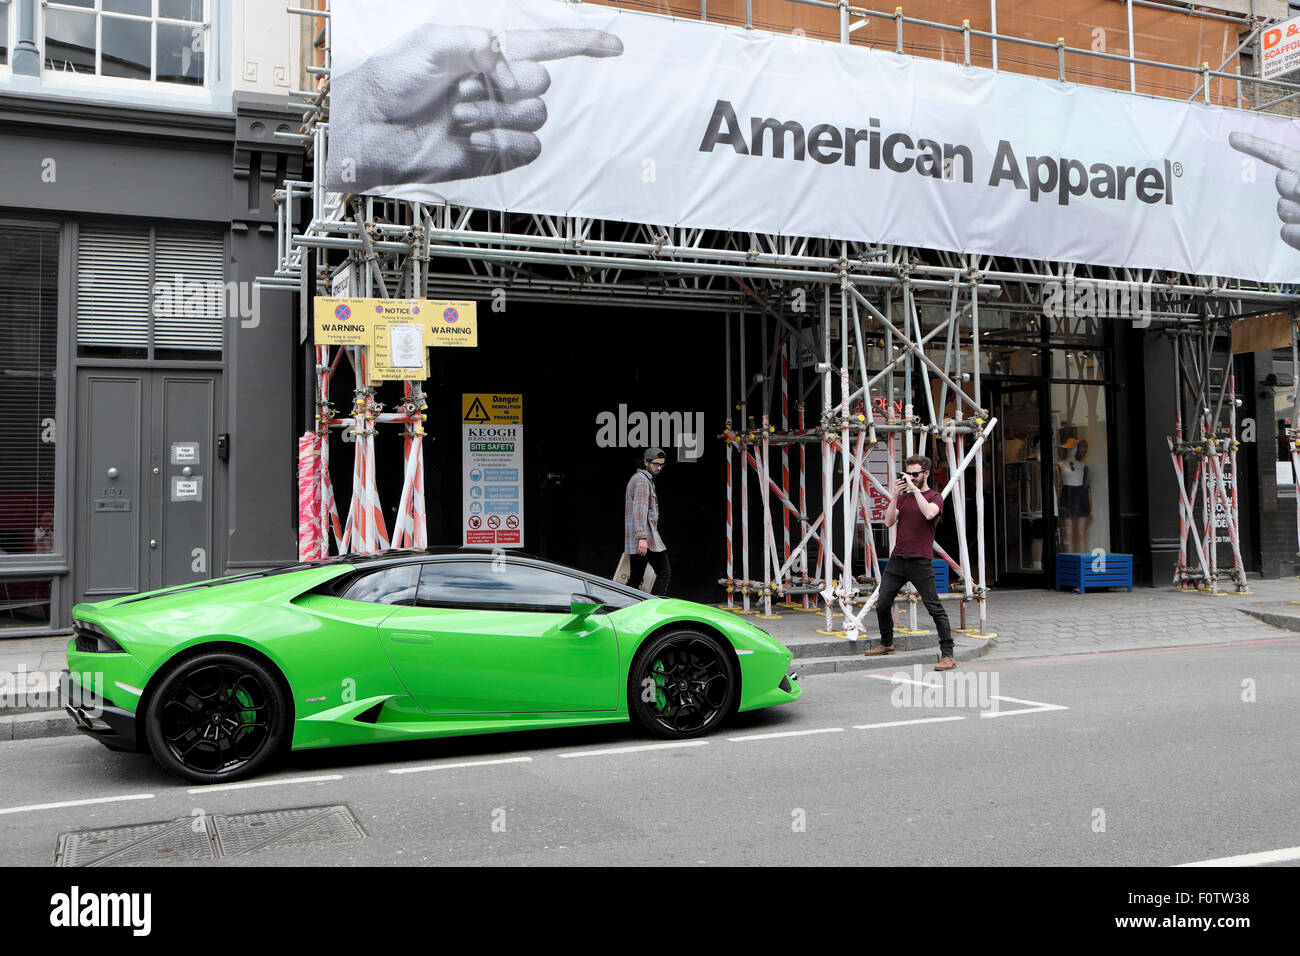 Man photographing green Lamborghini parked outside American Apparel shop in Shoreditch East London, UK   KATHY DEWITT Stock Photo